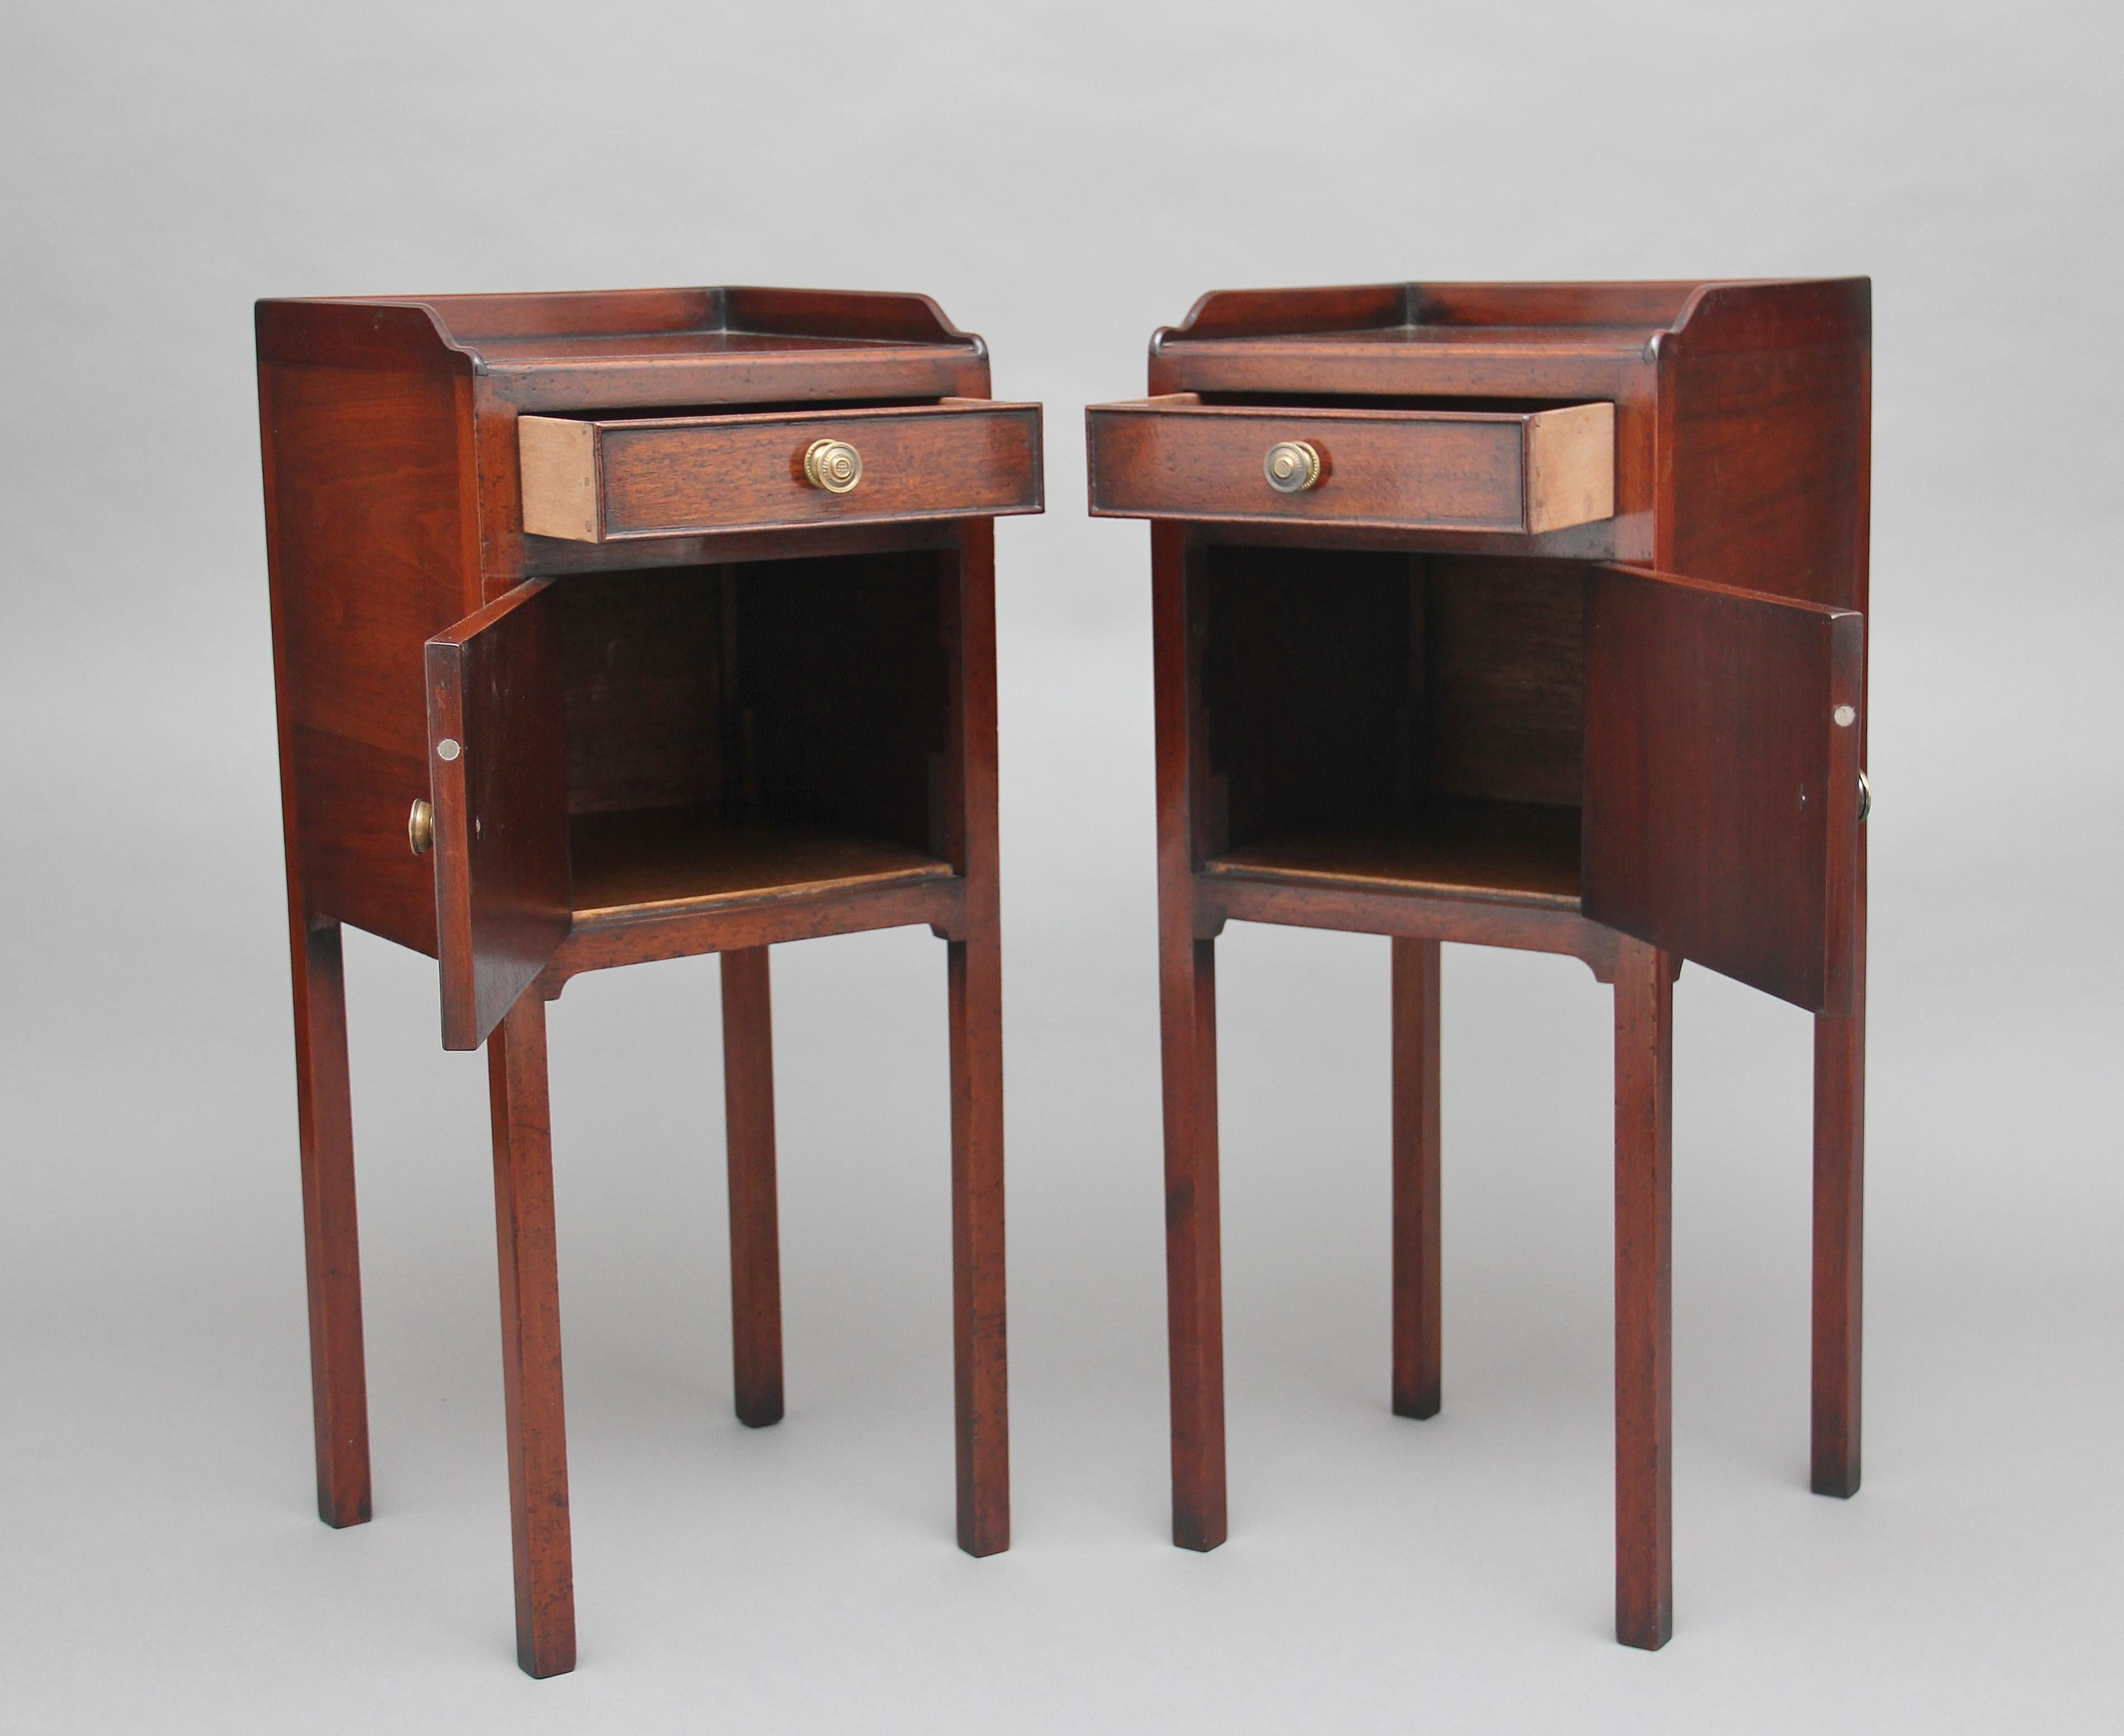 A nice pair of early 20th century mahogany bedside cupboards, the tops having a gallery running along the sides and back, the front of the cupboards having a single drawer above a hinged cupboard door with brass turned engraved handles, supported on